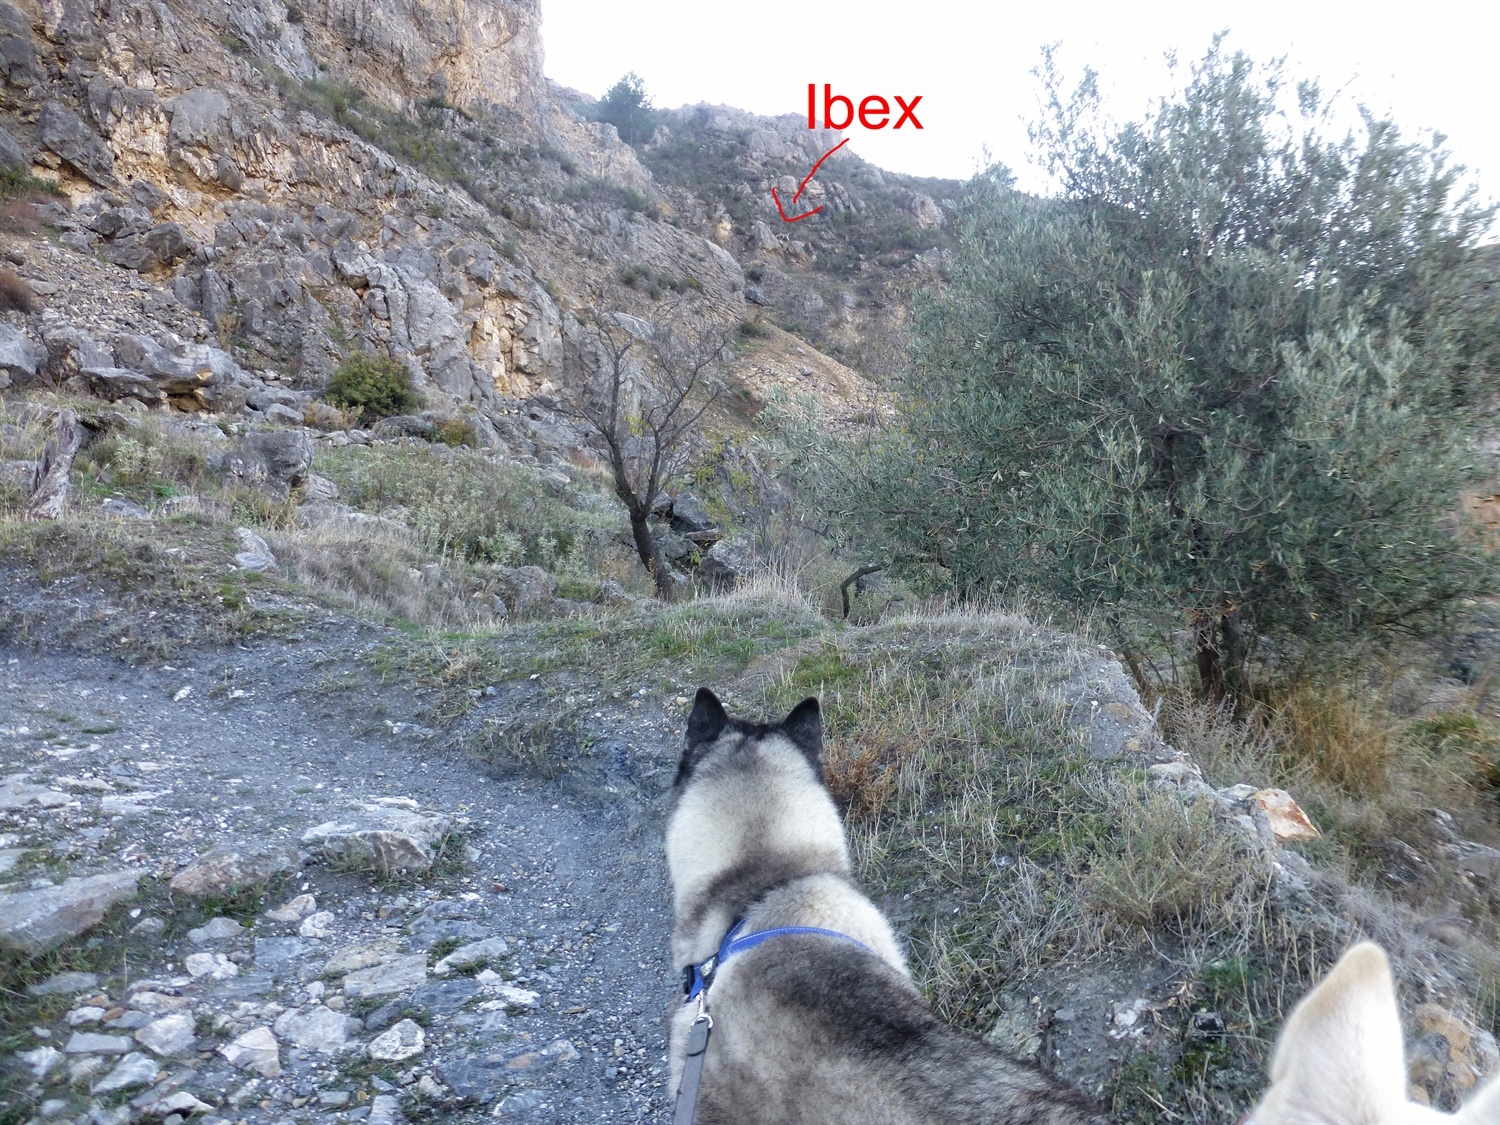 Hard to see in this photo as it has been shrunk down so much but the Ibex are running across the mountainside. You can see me and Rita want to run with them to